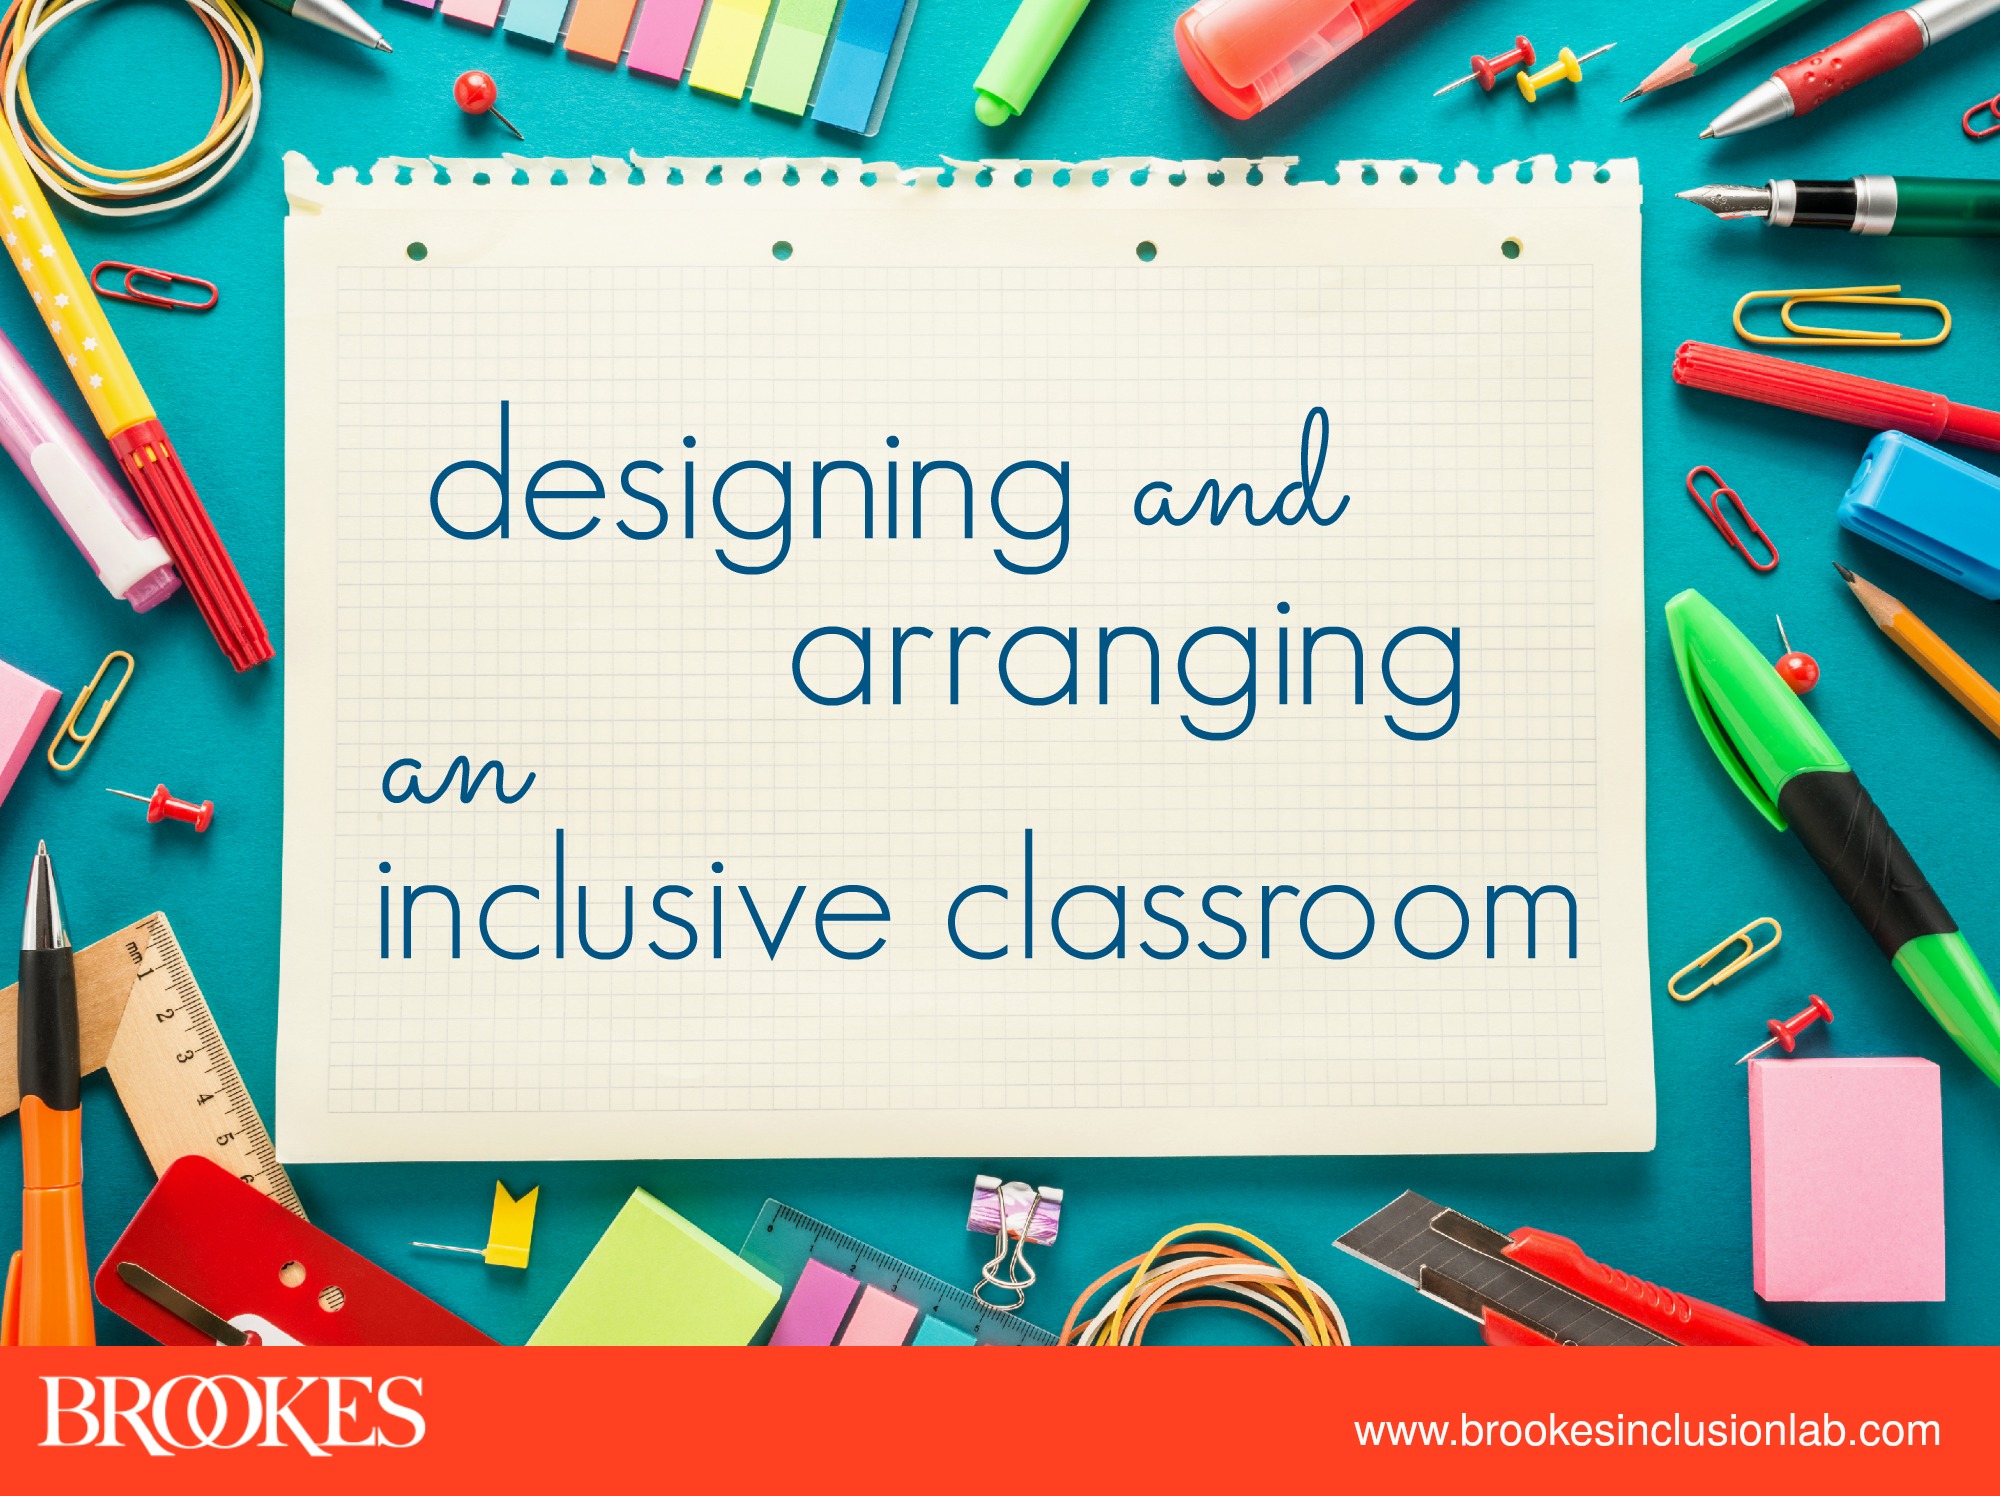 classroom design for special education